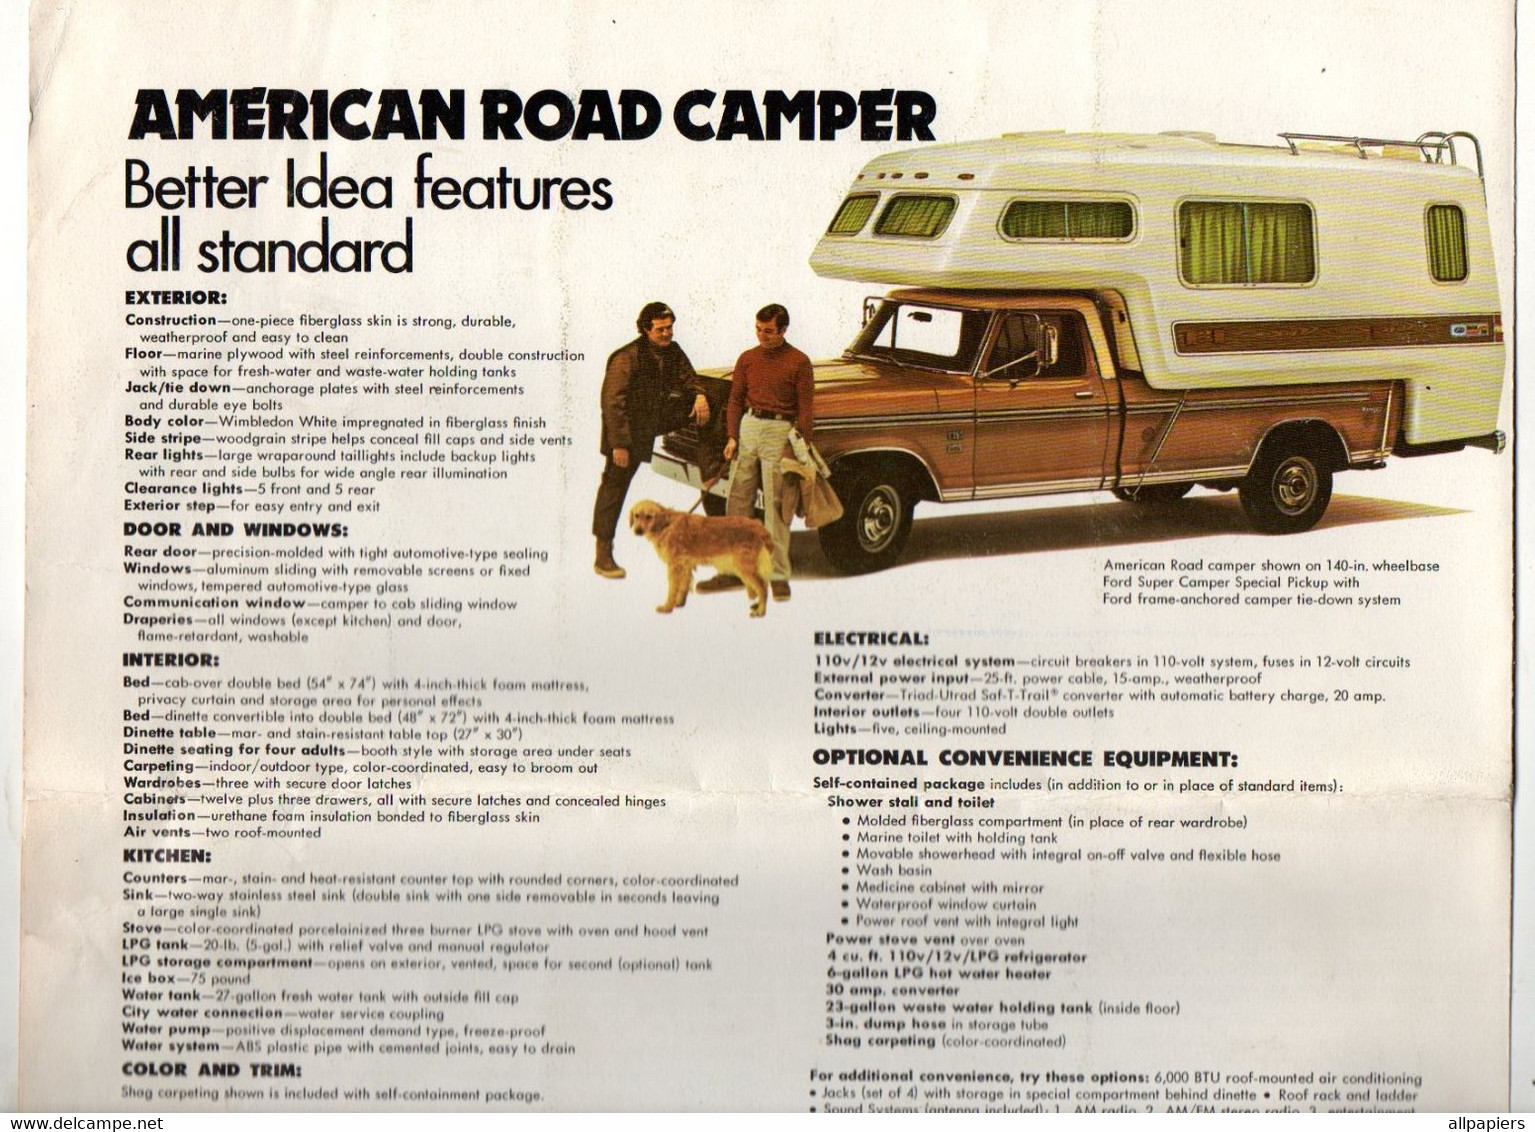 Dépliant Publicitaire Ford's American Road Camper The New Generation Camper Body From Ford De 1973 - Format : 30.5x28 Cm - United States